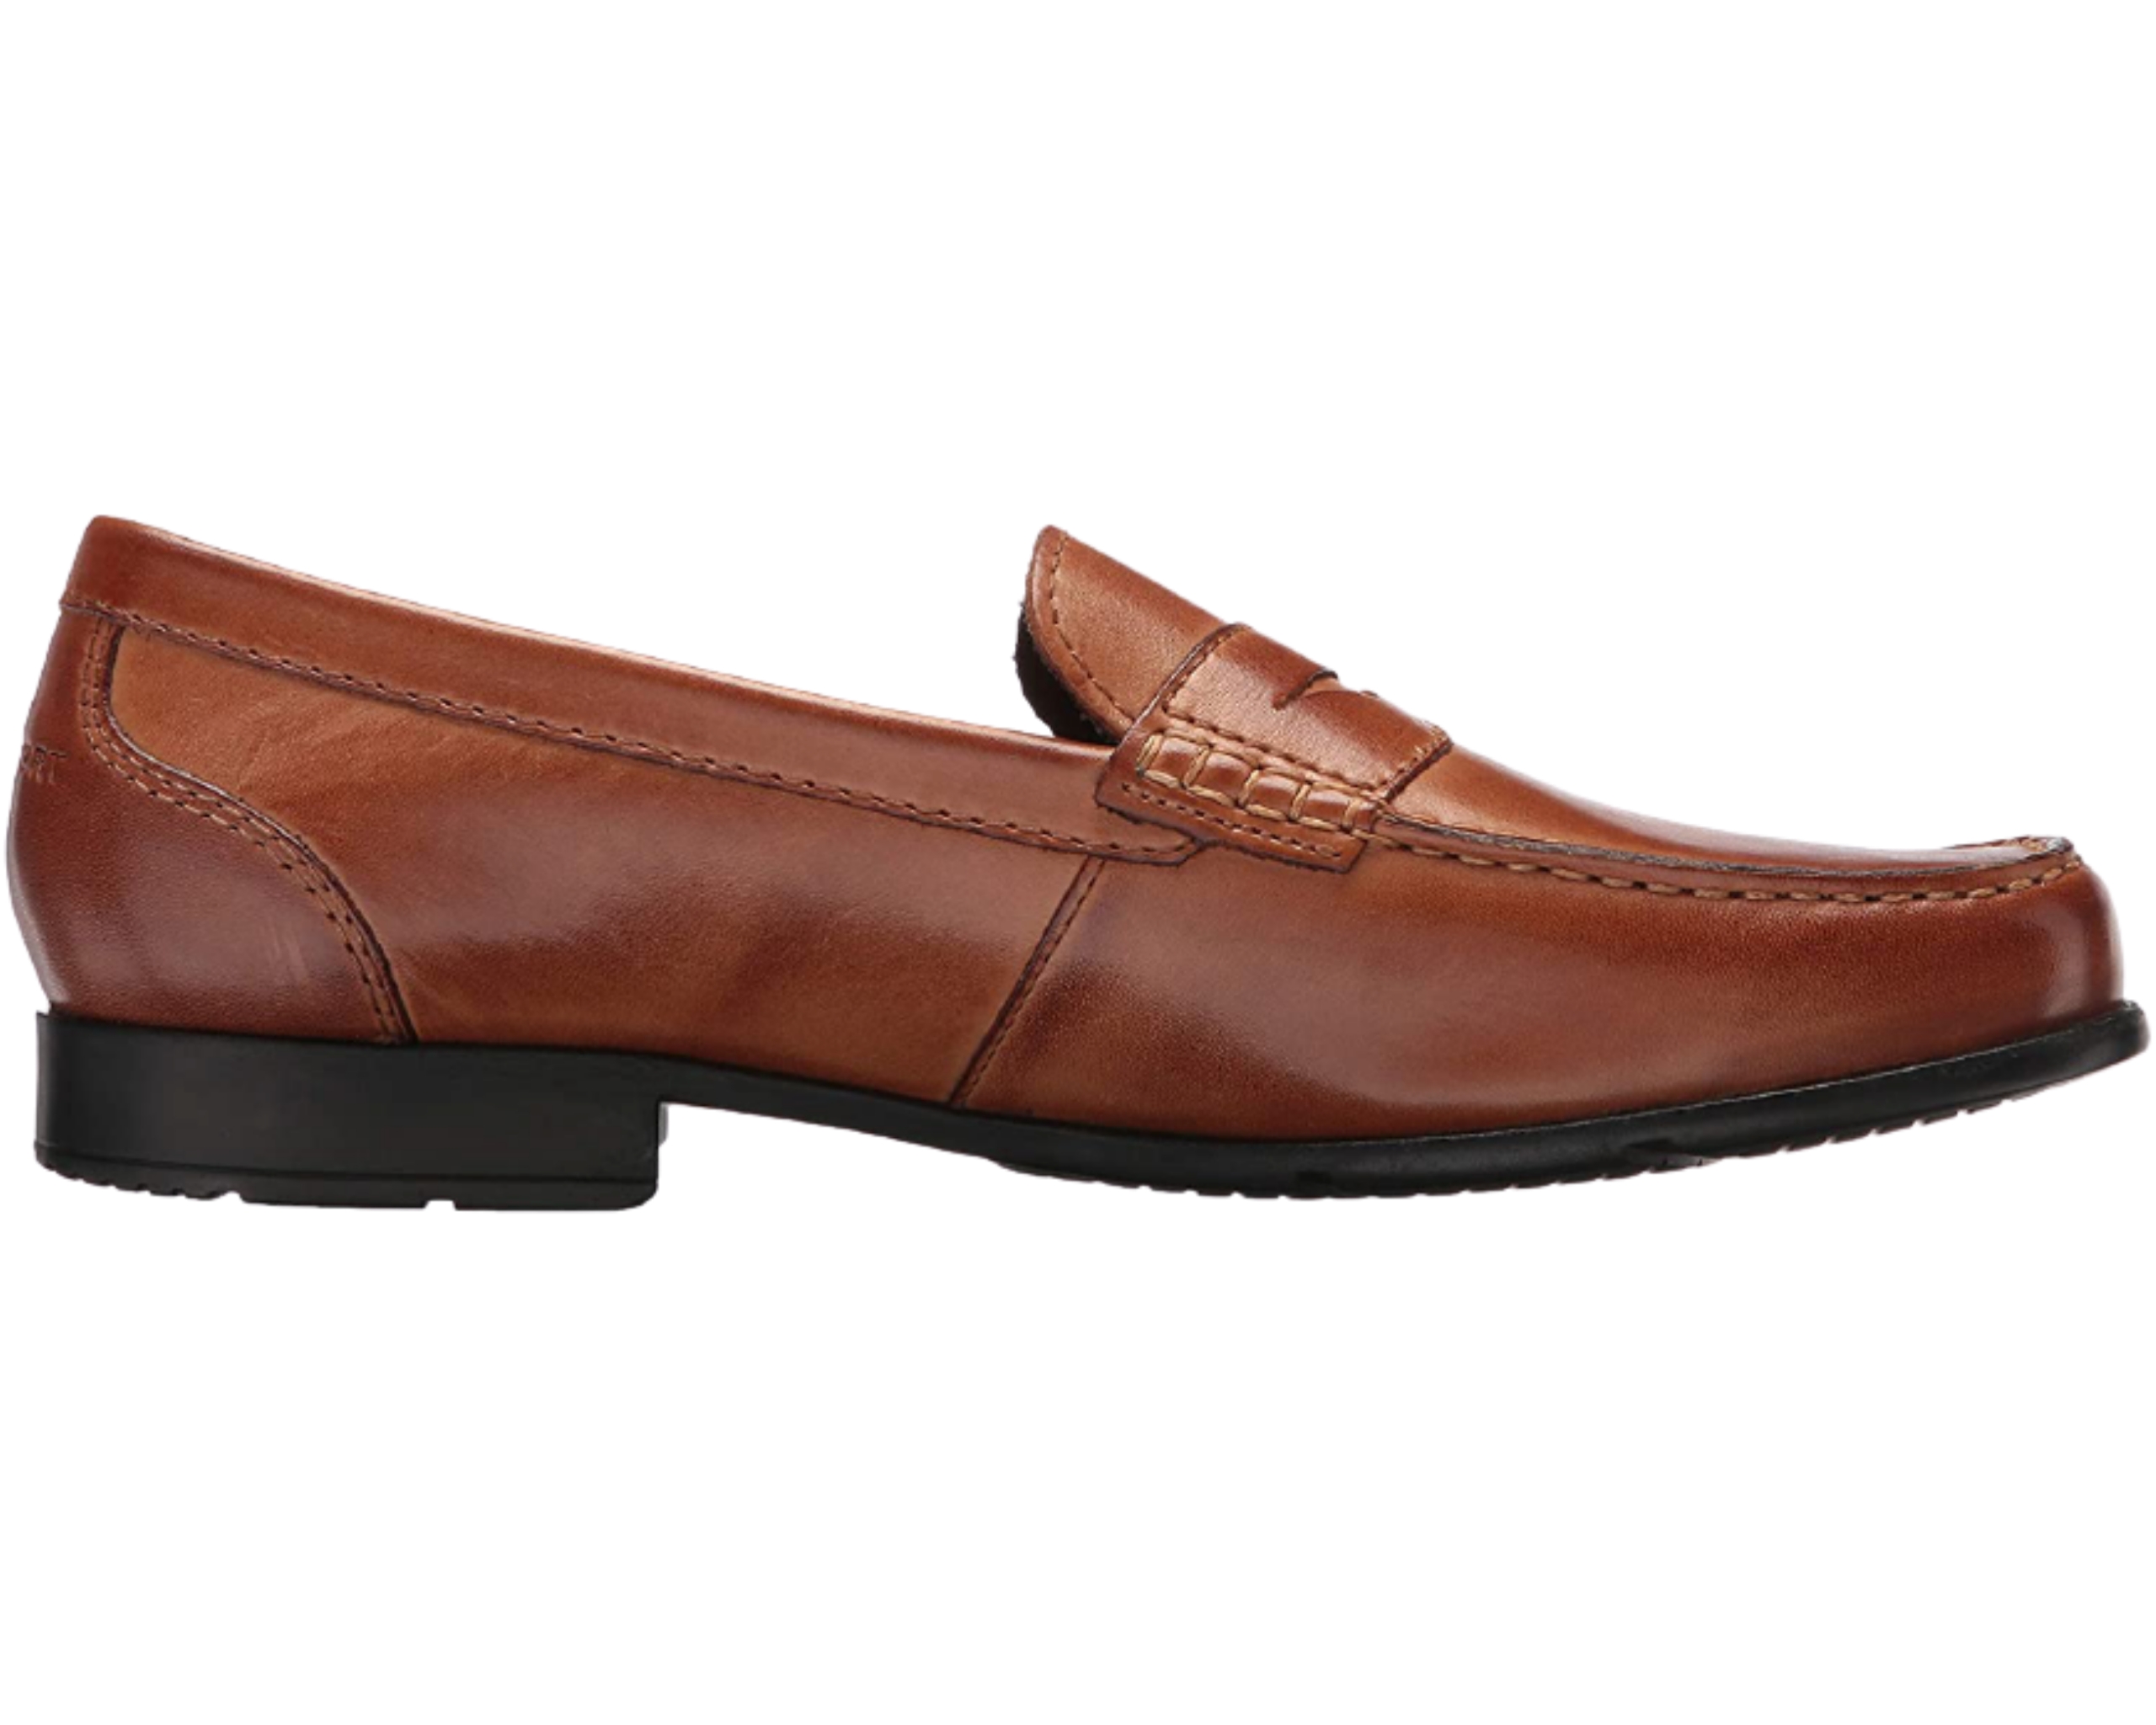 Best leather shoes for men